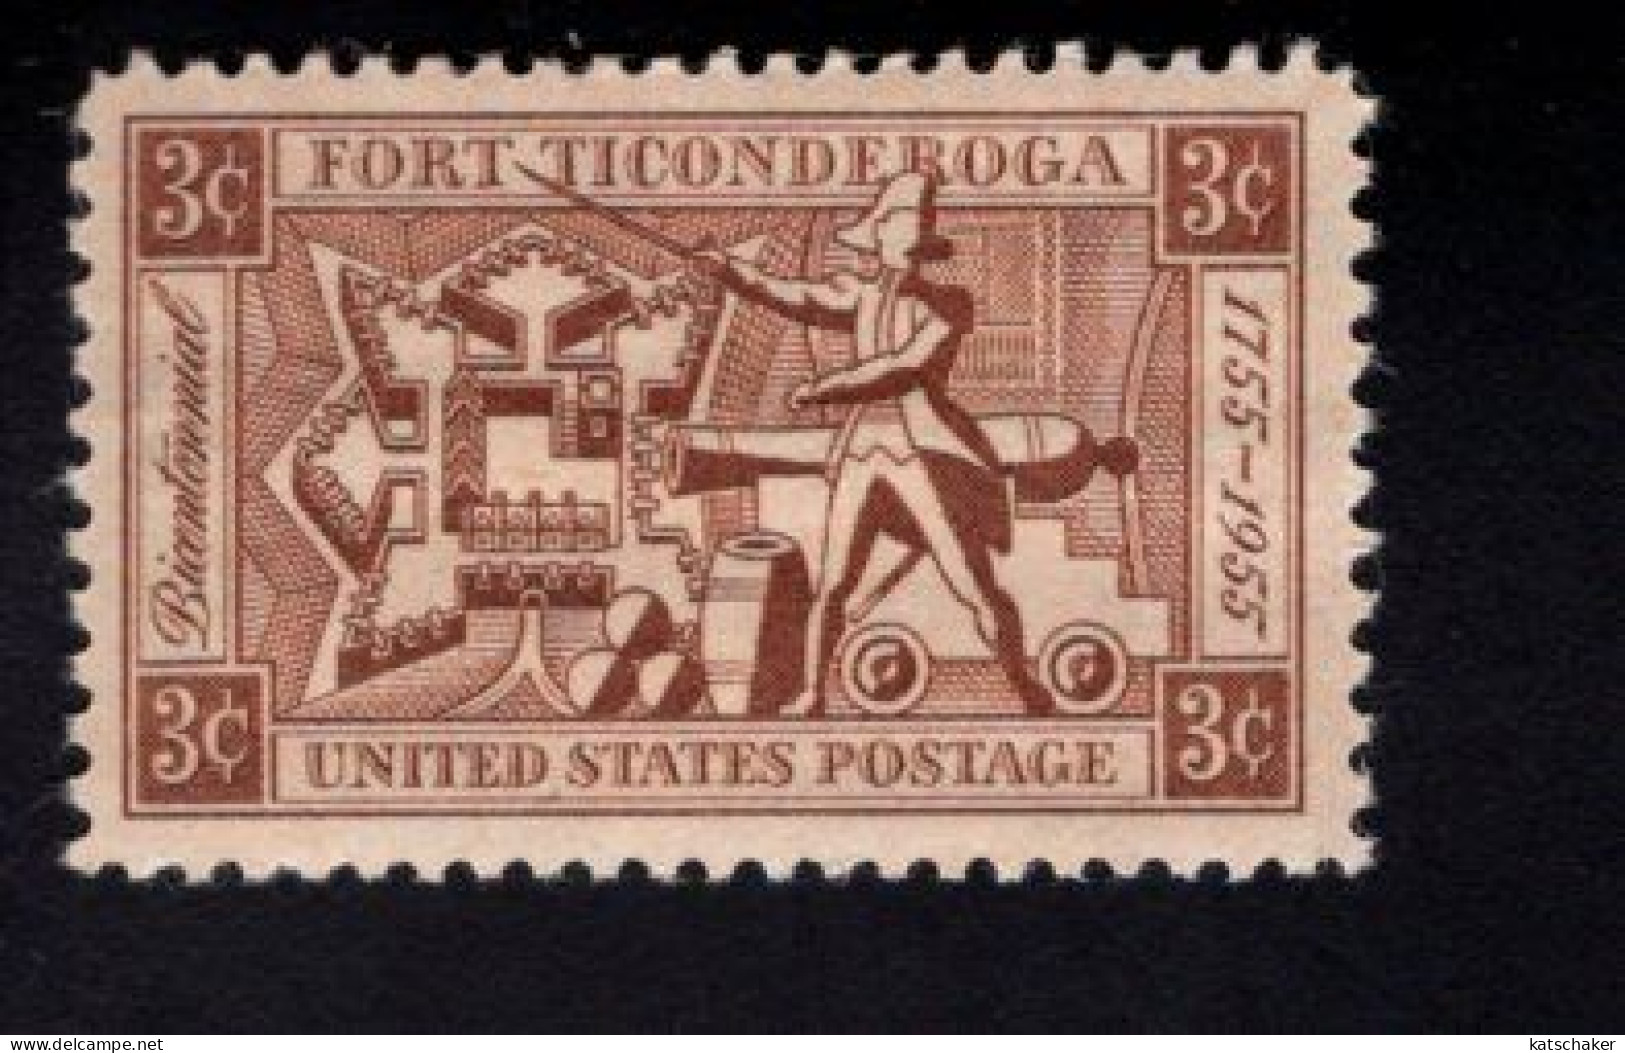 2018737274 1955 SCOTT 1071 (XX) POSTFRIS MINT NEVER HINGED  - FORT TICONDEROGA ISSUE - MAP OF THE FORT - Neufs